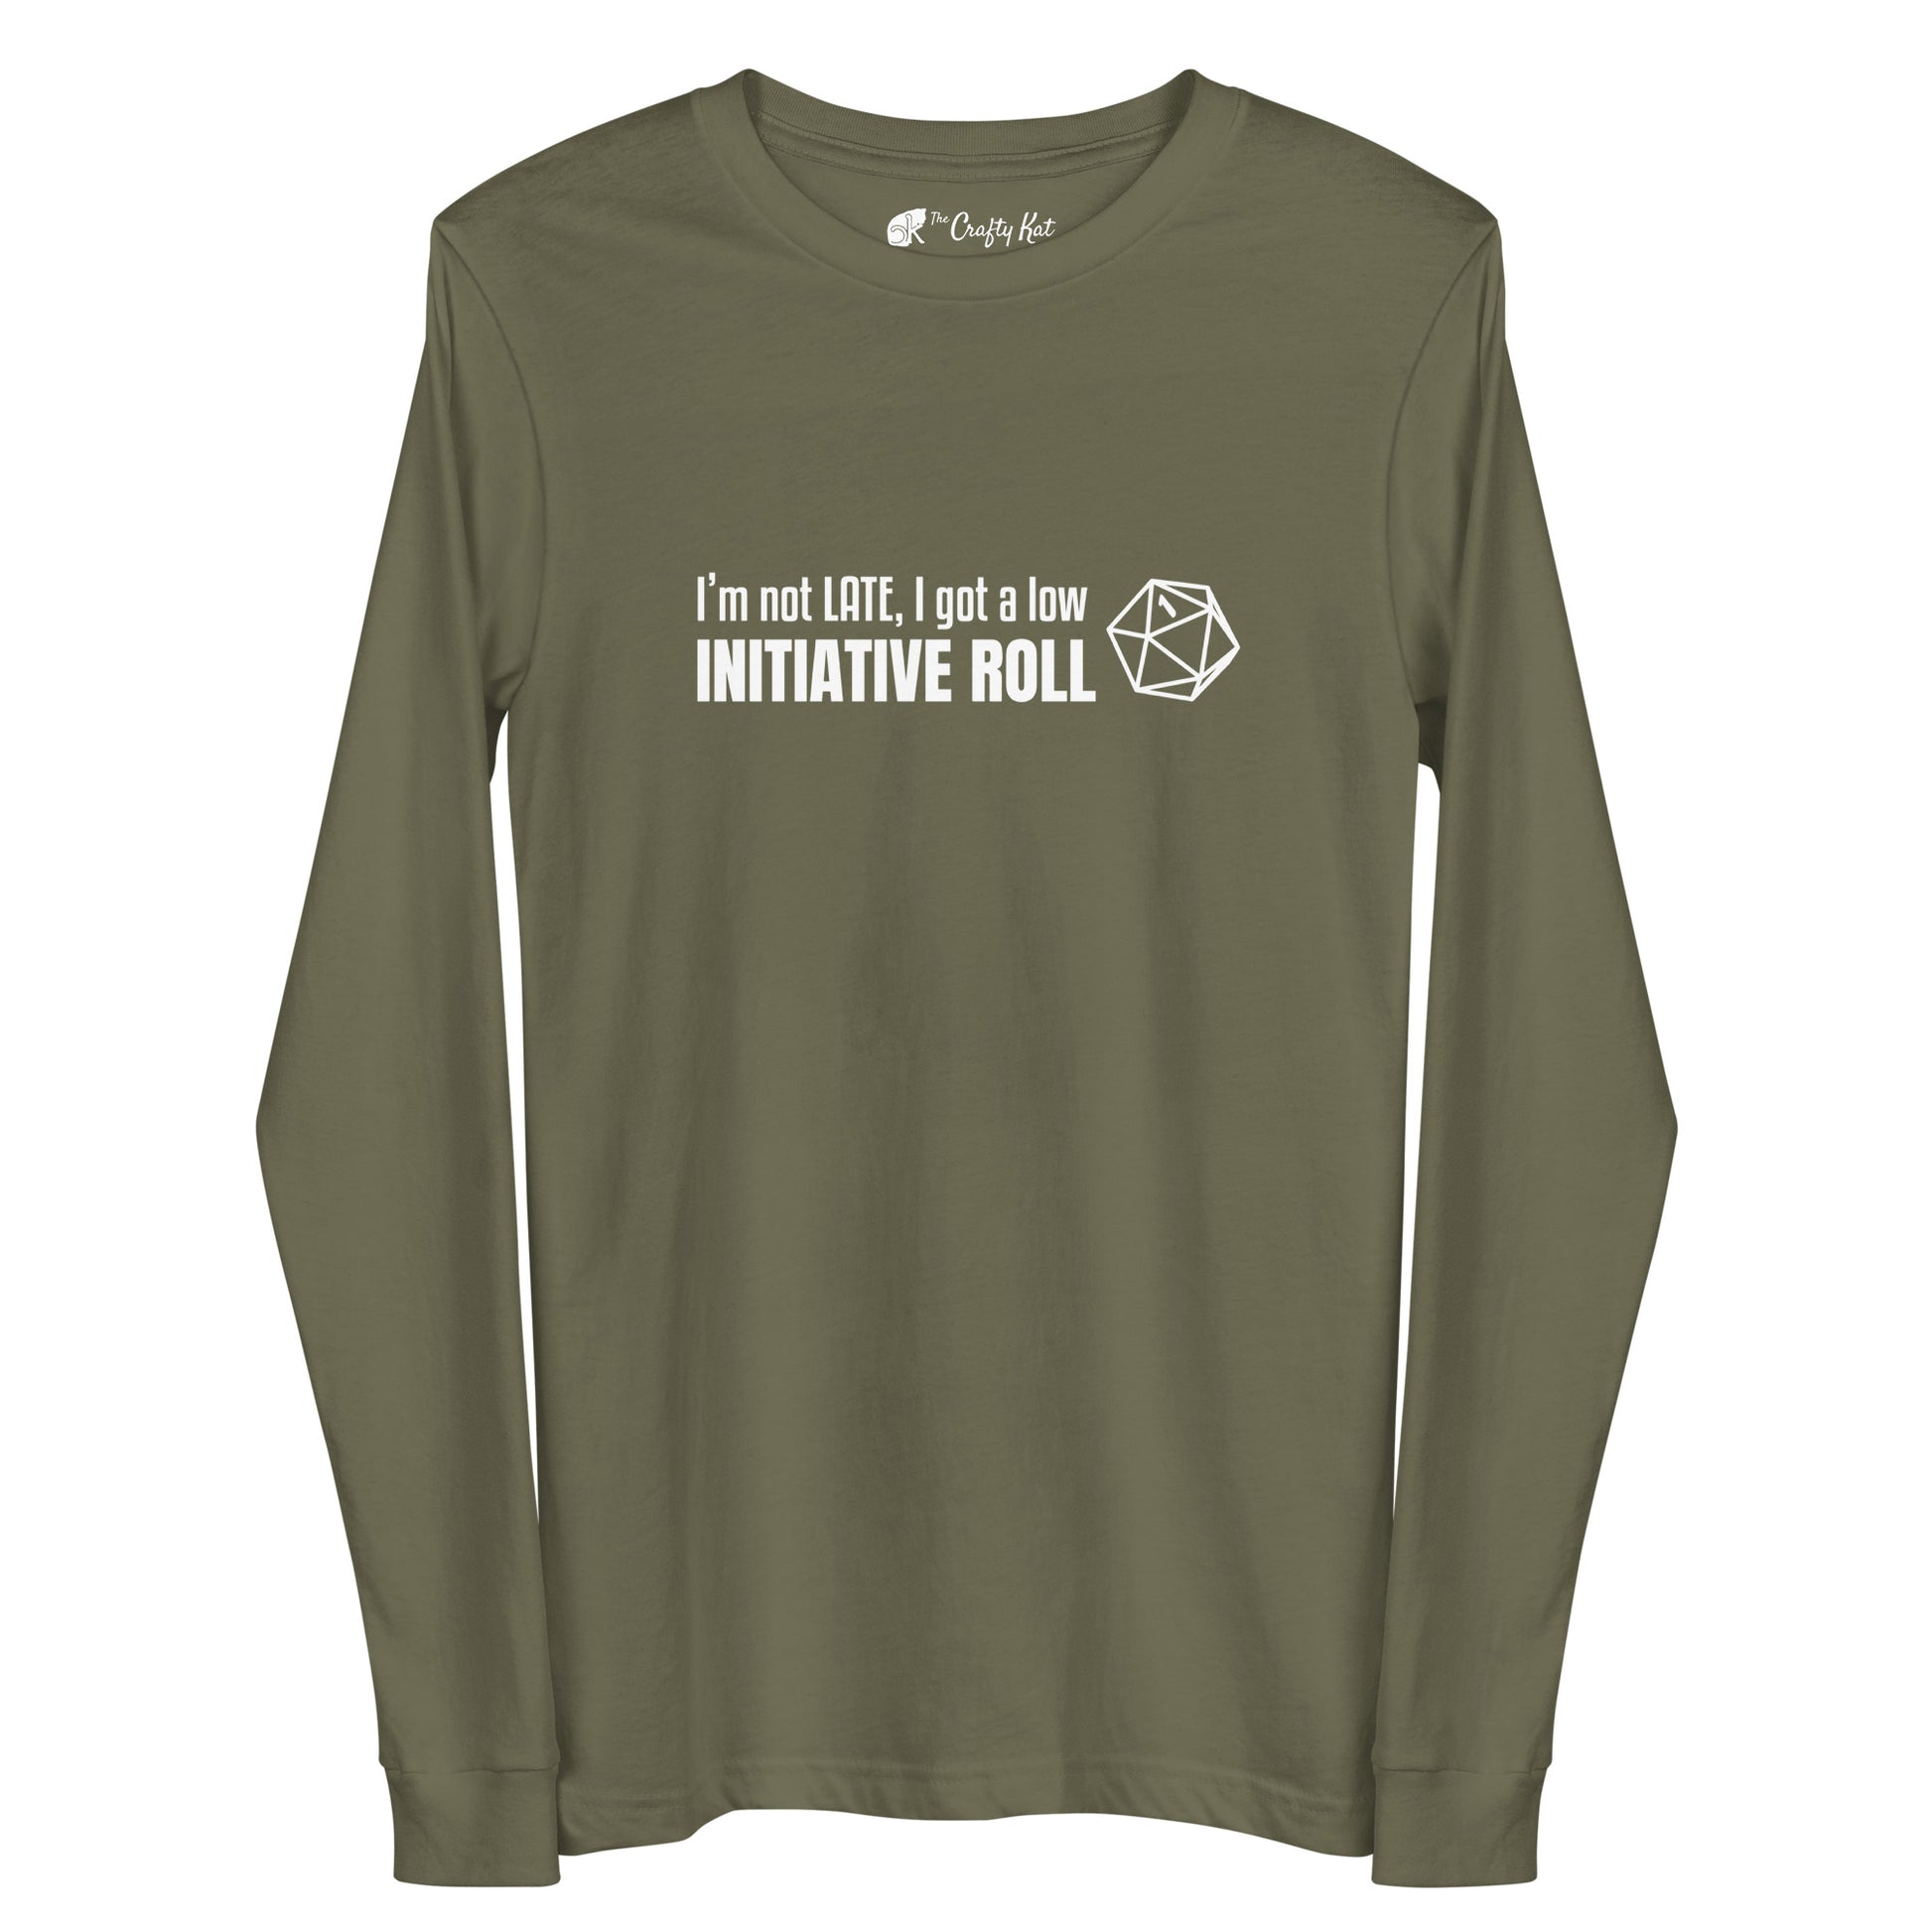 Military Green long-sleeve tee with a graphic of a d20 (twenty-sided die) showing a roll of "1" and text: "I'm not LATE, I got a low INITIATIVE ROLL"